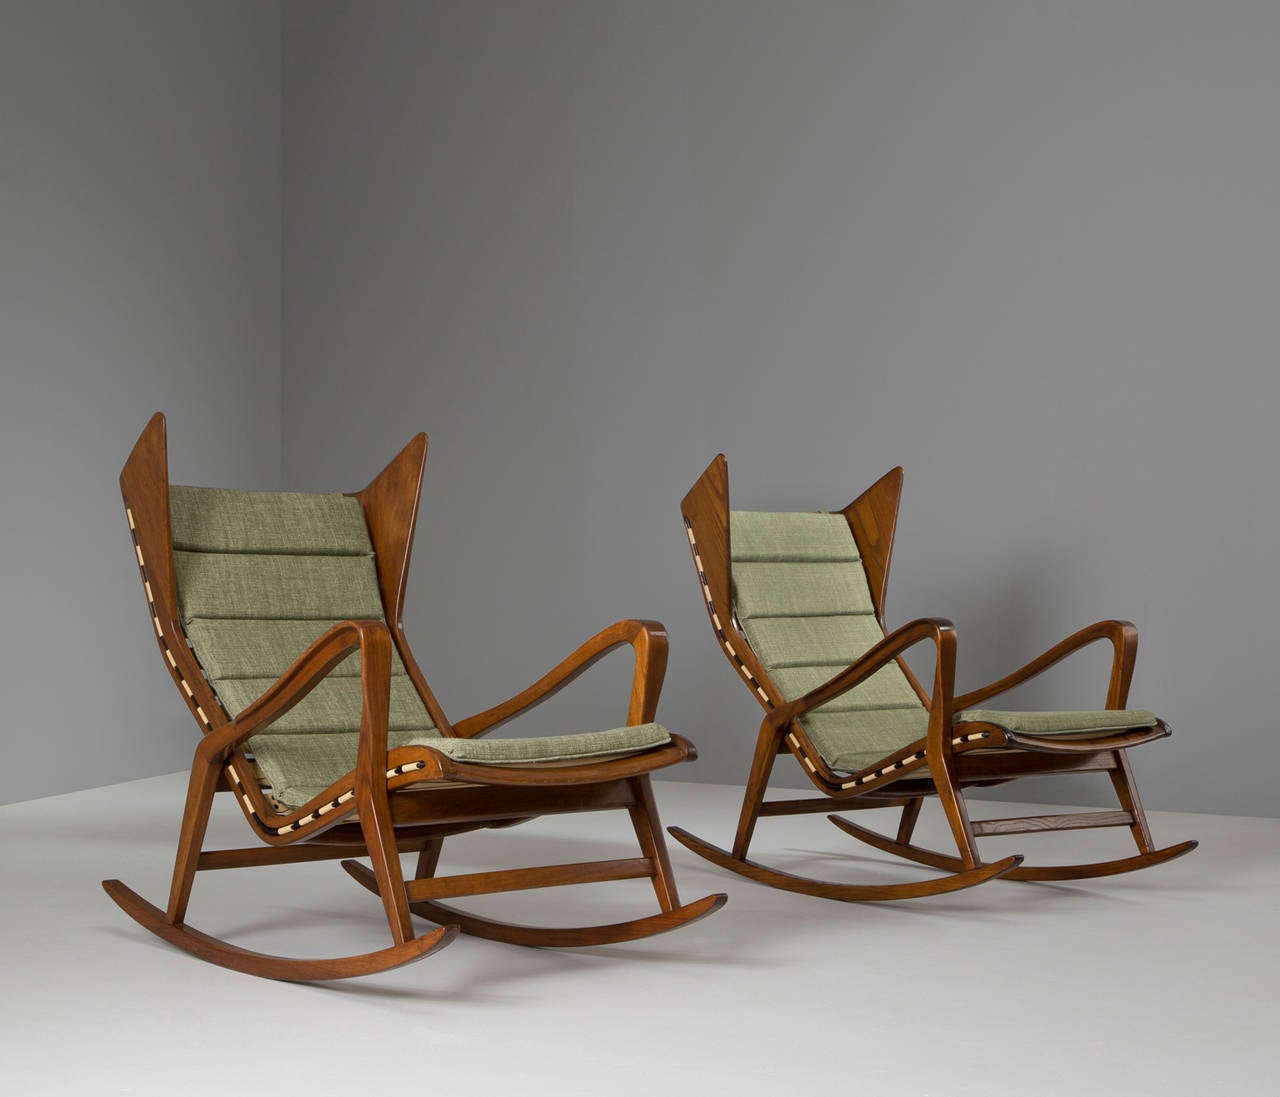 A pair of lounge chairs, in walnut and fabric, for Cassina, Italy, 1950s.

Very rare set of rocking chairs in walnut designed by the Italian company Cassina, in the style of Gio Ponti. Exquisite production techniques used which are shown by the